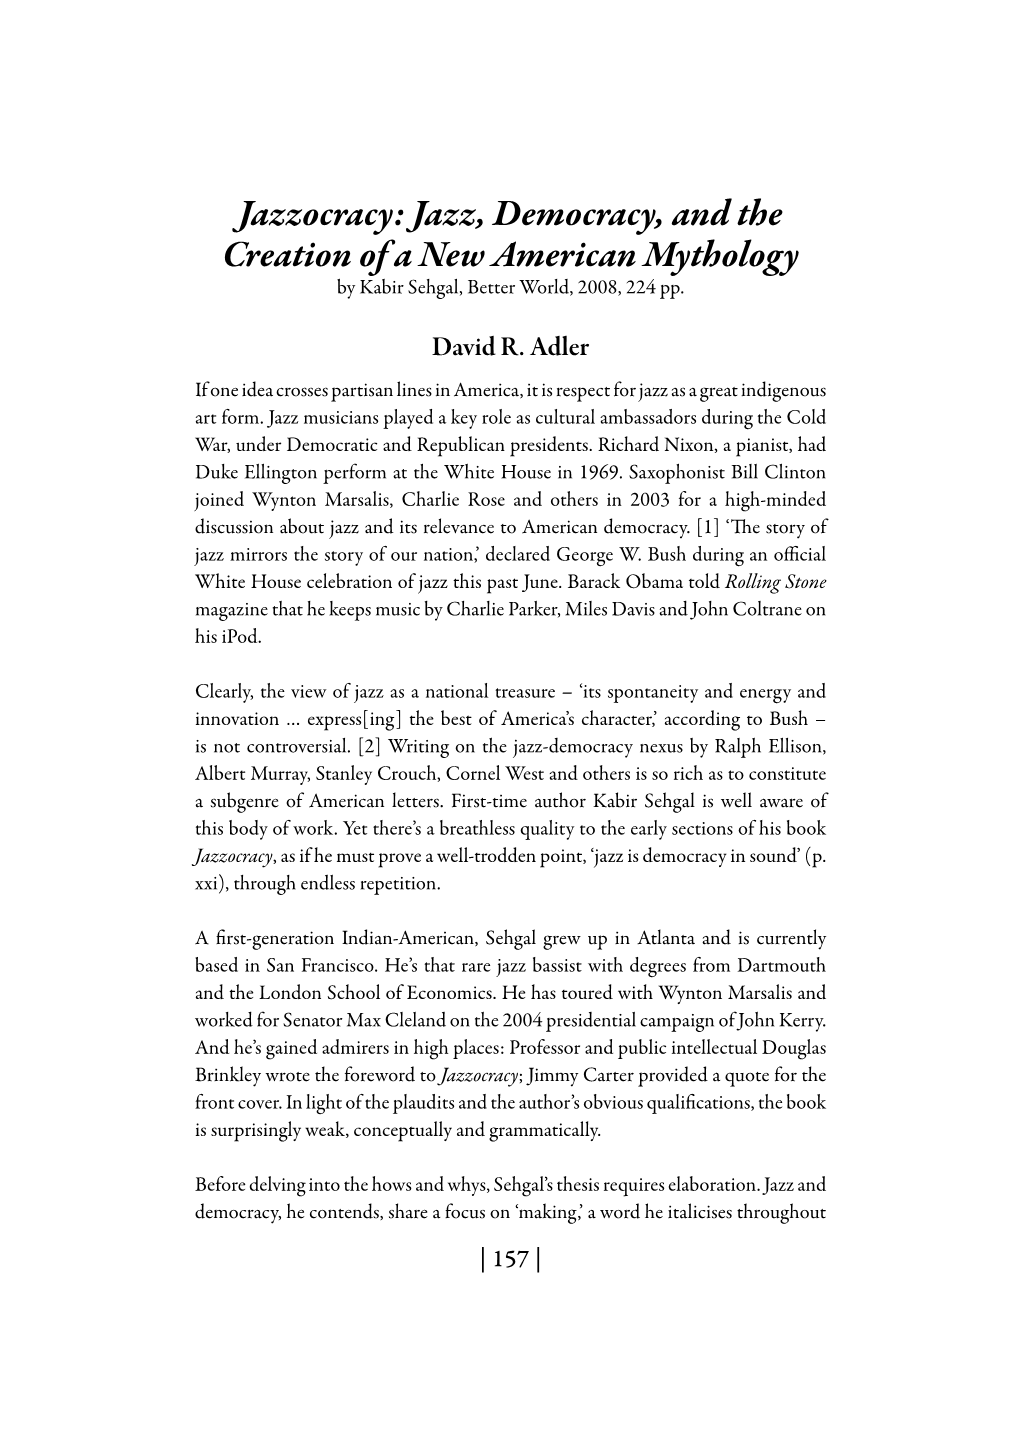 Jazzocracy: Jazz, Democracy, and the Creation of a New American Mythology by Kabir Sehgal, Better World, 2008, 224 Pp